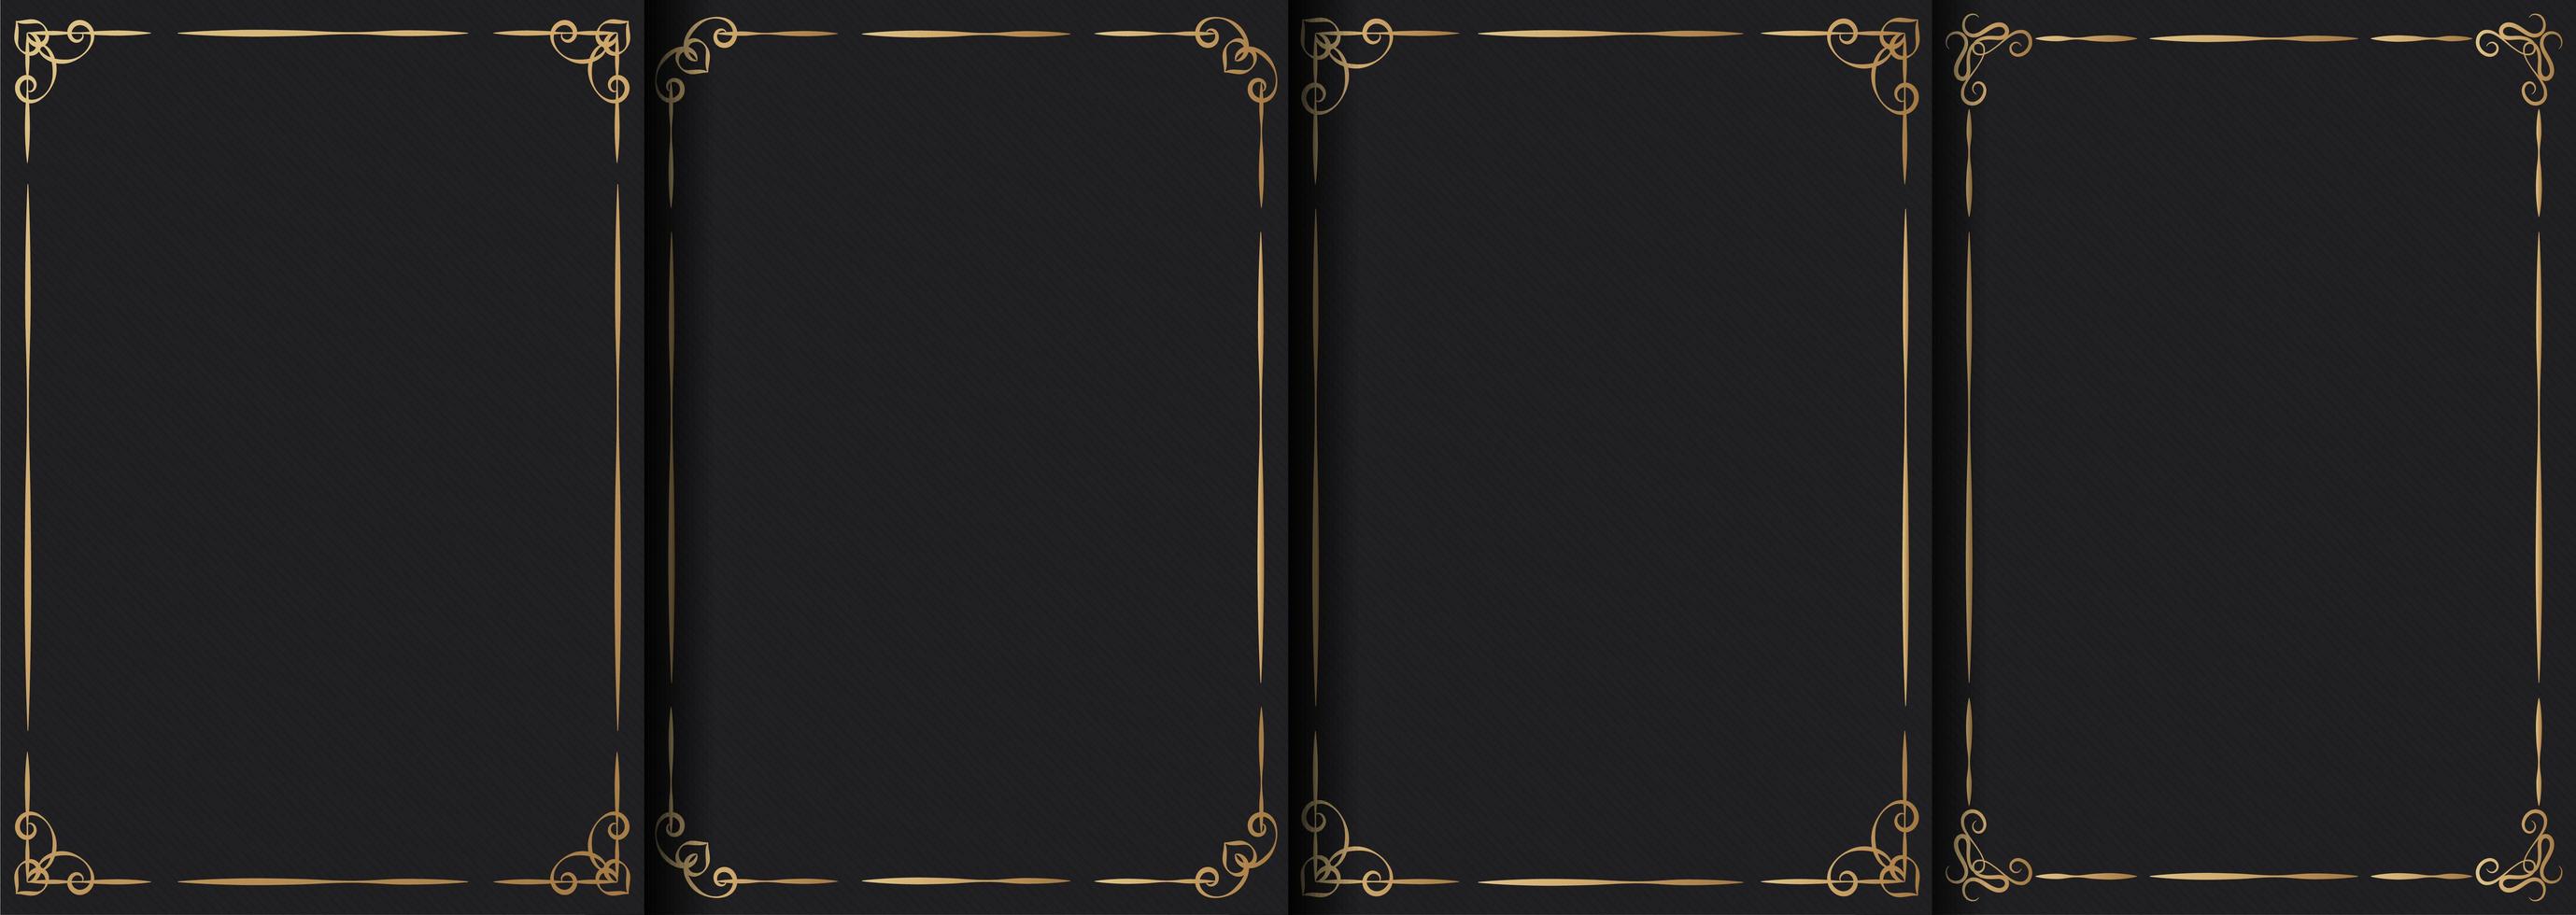 Luxury vintage ornamental frame collection vector